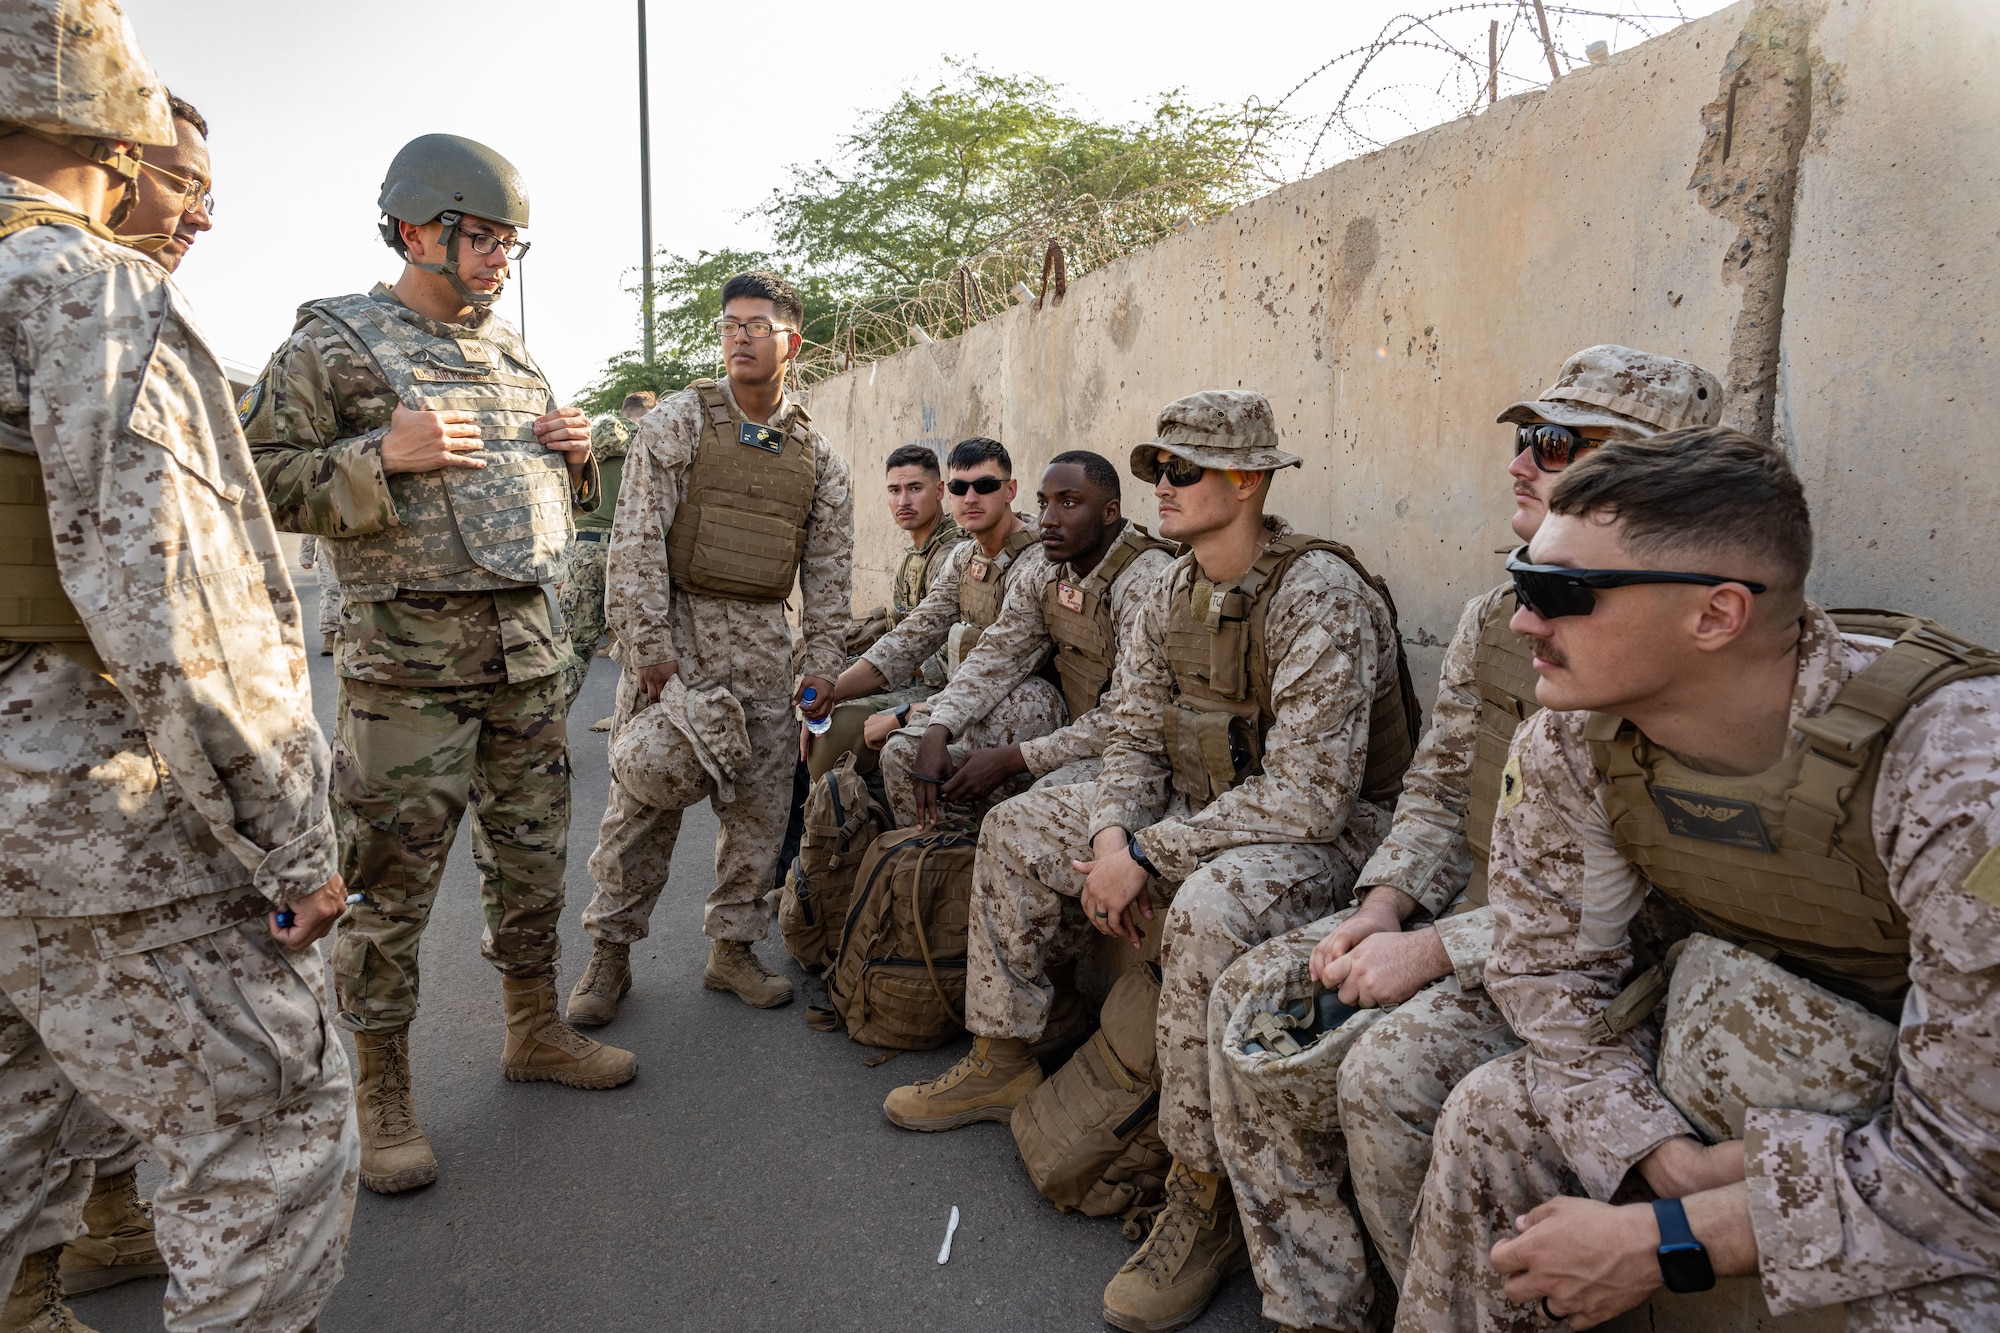 U.S. service members sit together and discuss strategy.